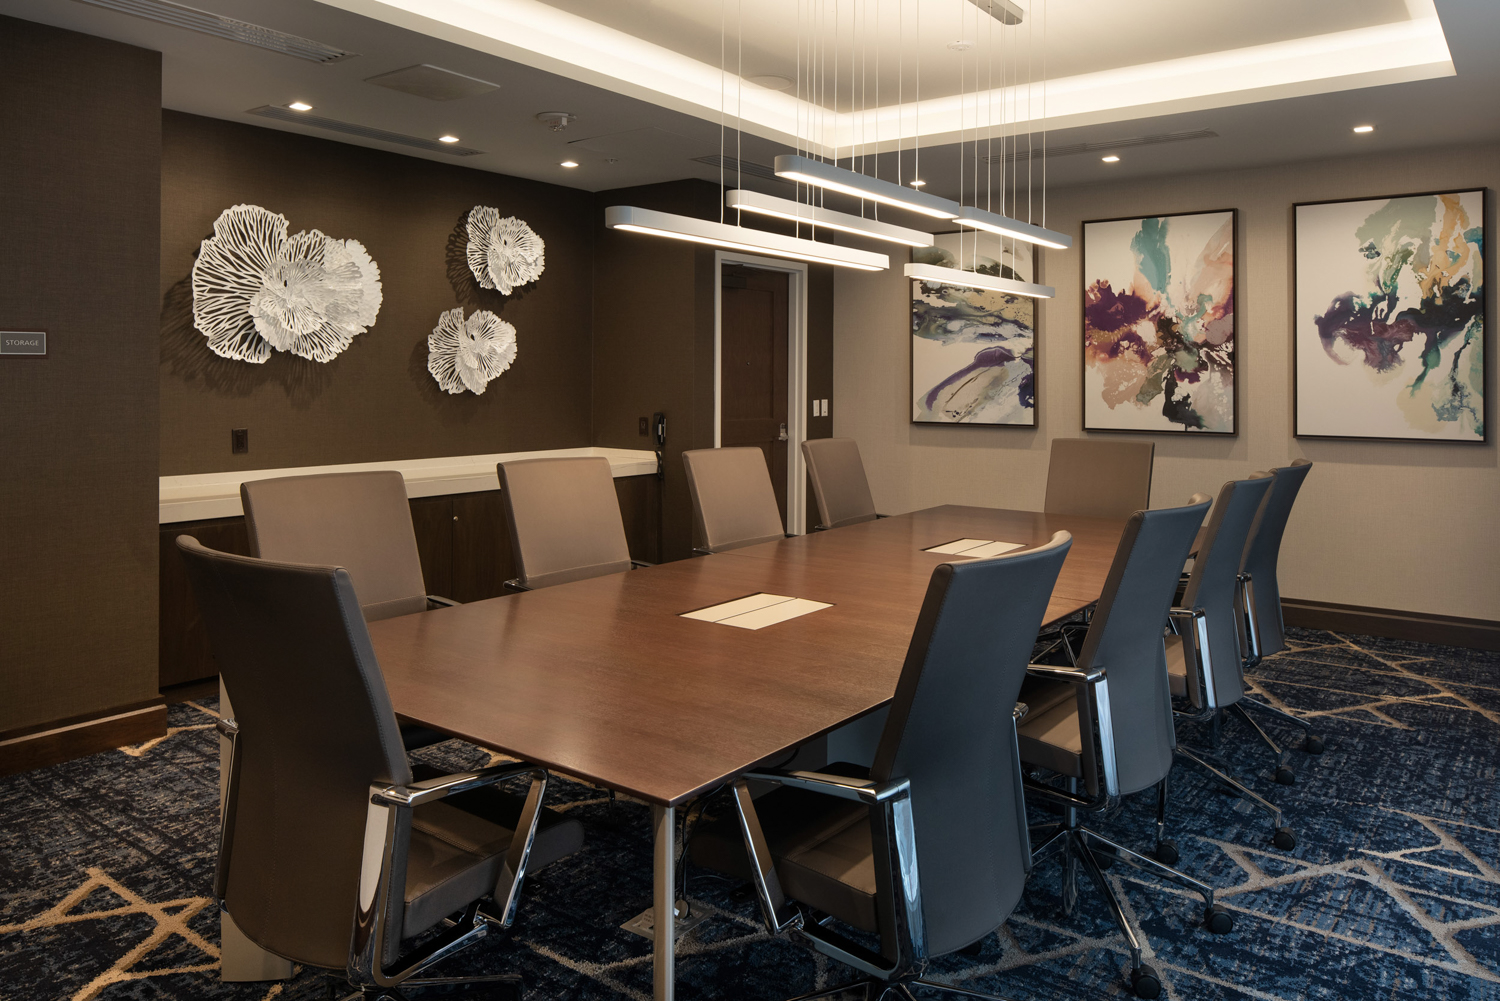 Boardroom meeting space in 1431 Jefferson Street, image courtesy project team